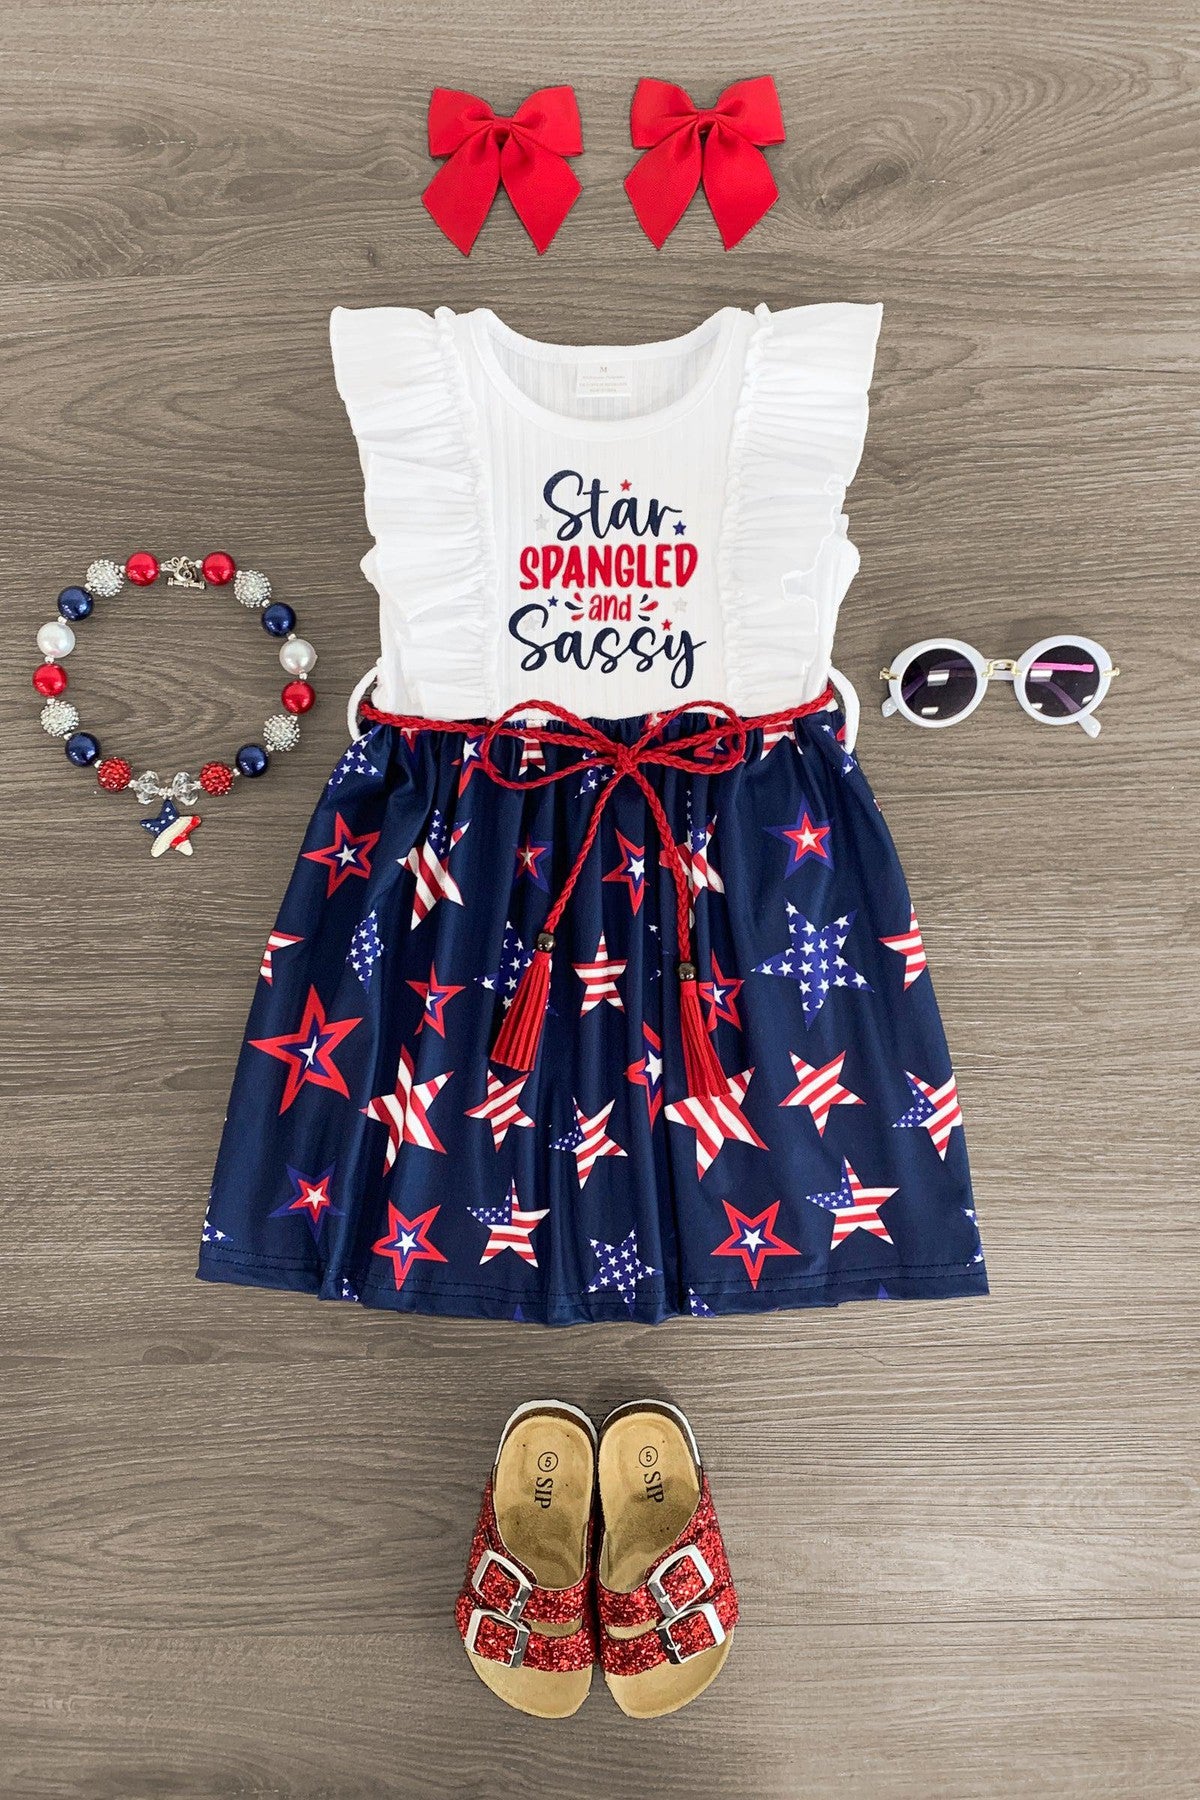 "Star Spangled and Sassy" Blue Star Dress - Sparkle in Pink